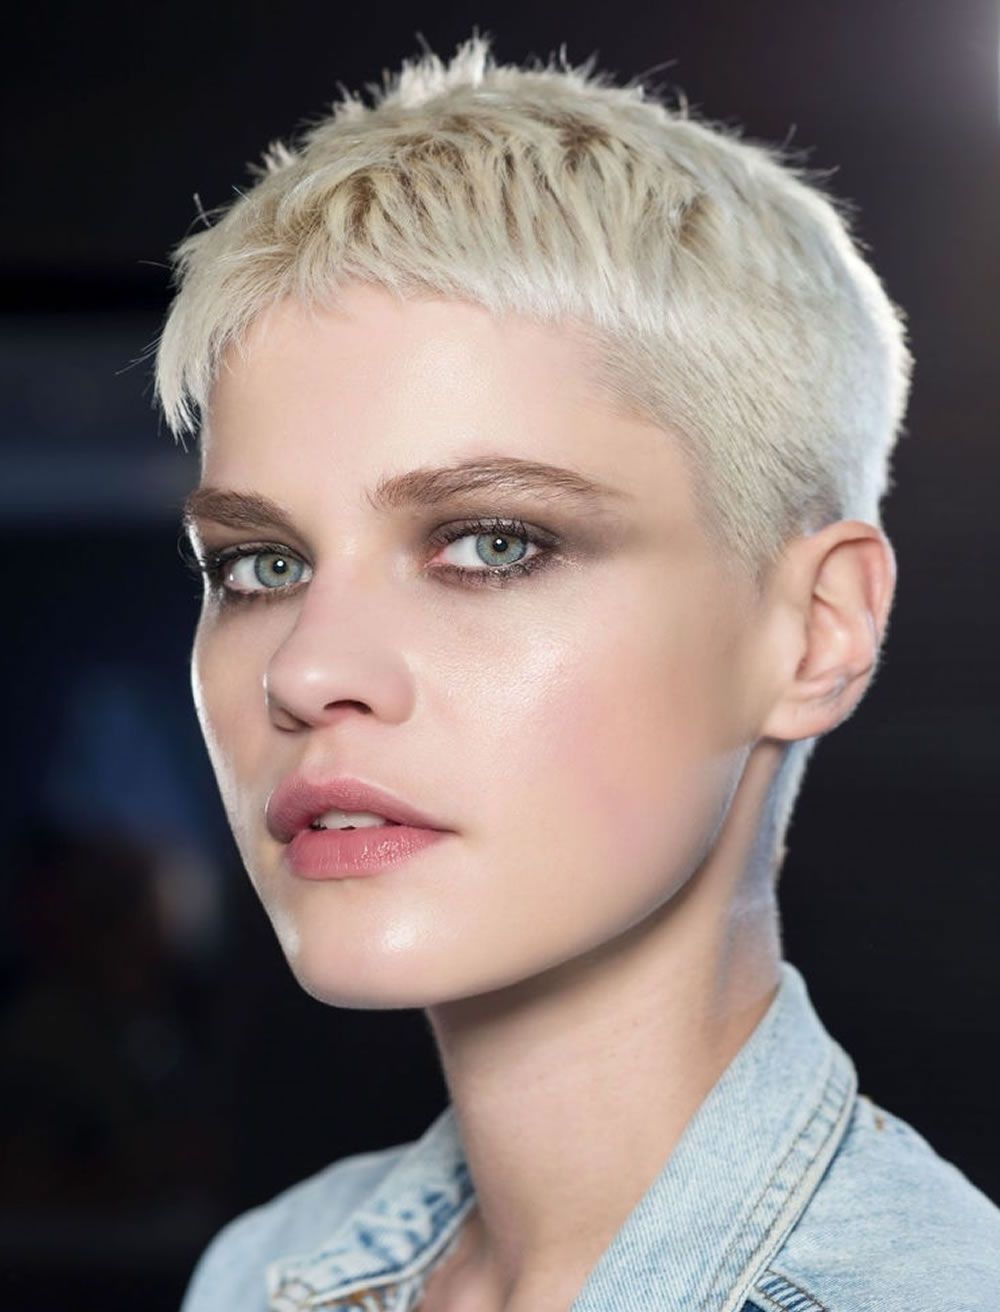 Very Short Pixie Haircut For Glorious Women Wallpaper Hd Cuts Of With 2018 Pink Short Pixie Hairstyles (View 8 of 15)